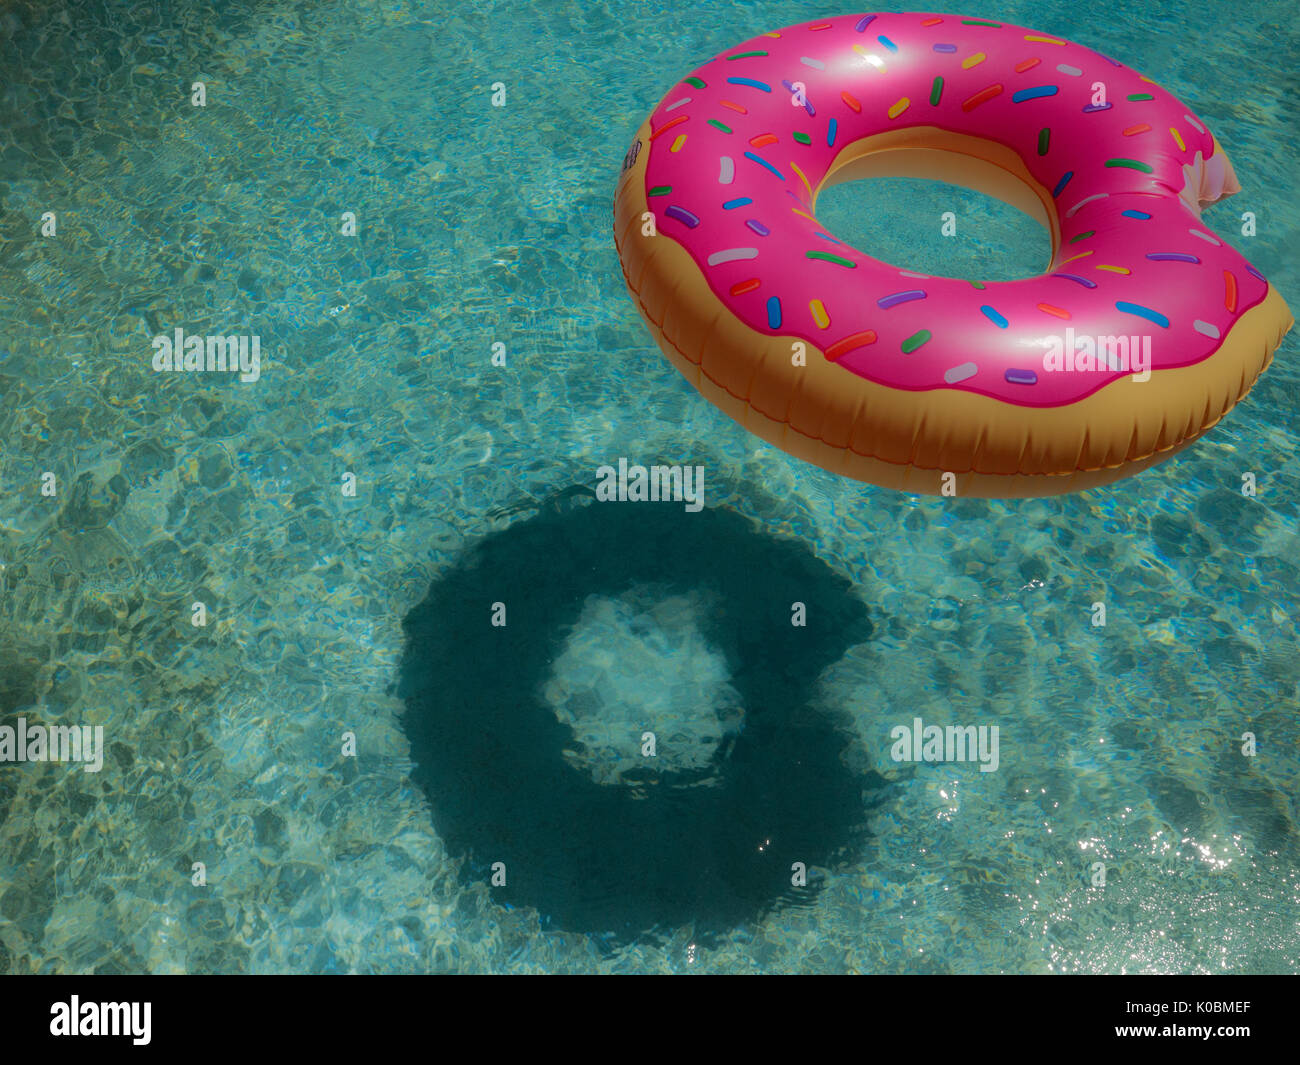 Pool Float Stock Photos And Pool Float Stock Images Alamy